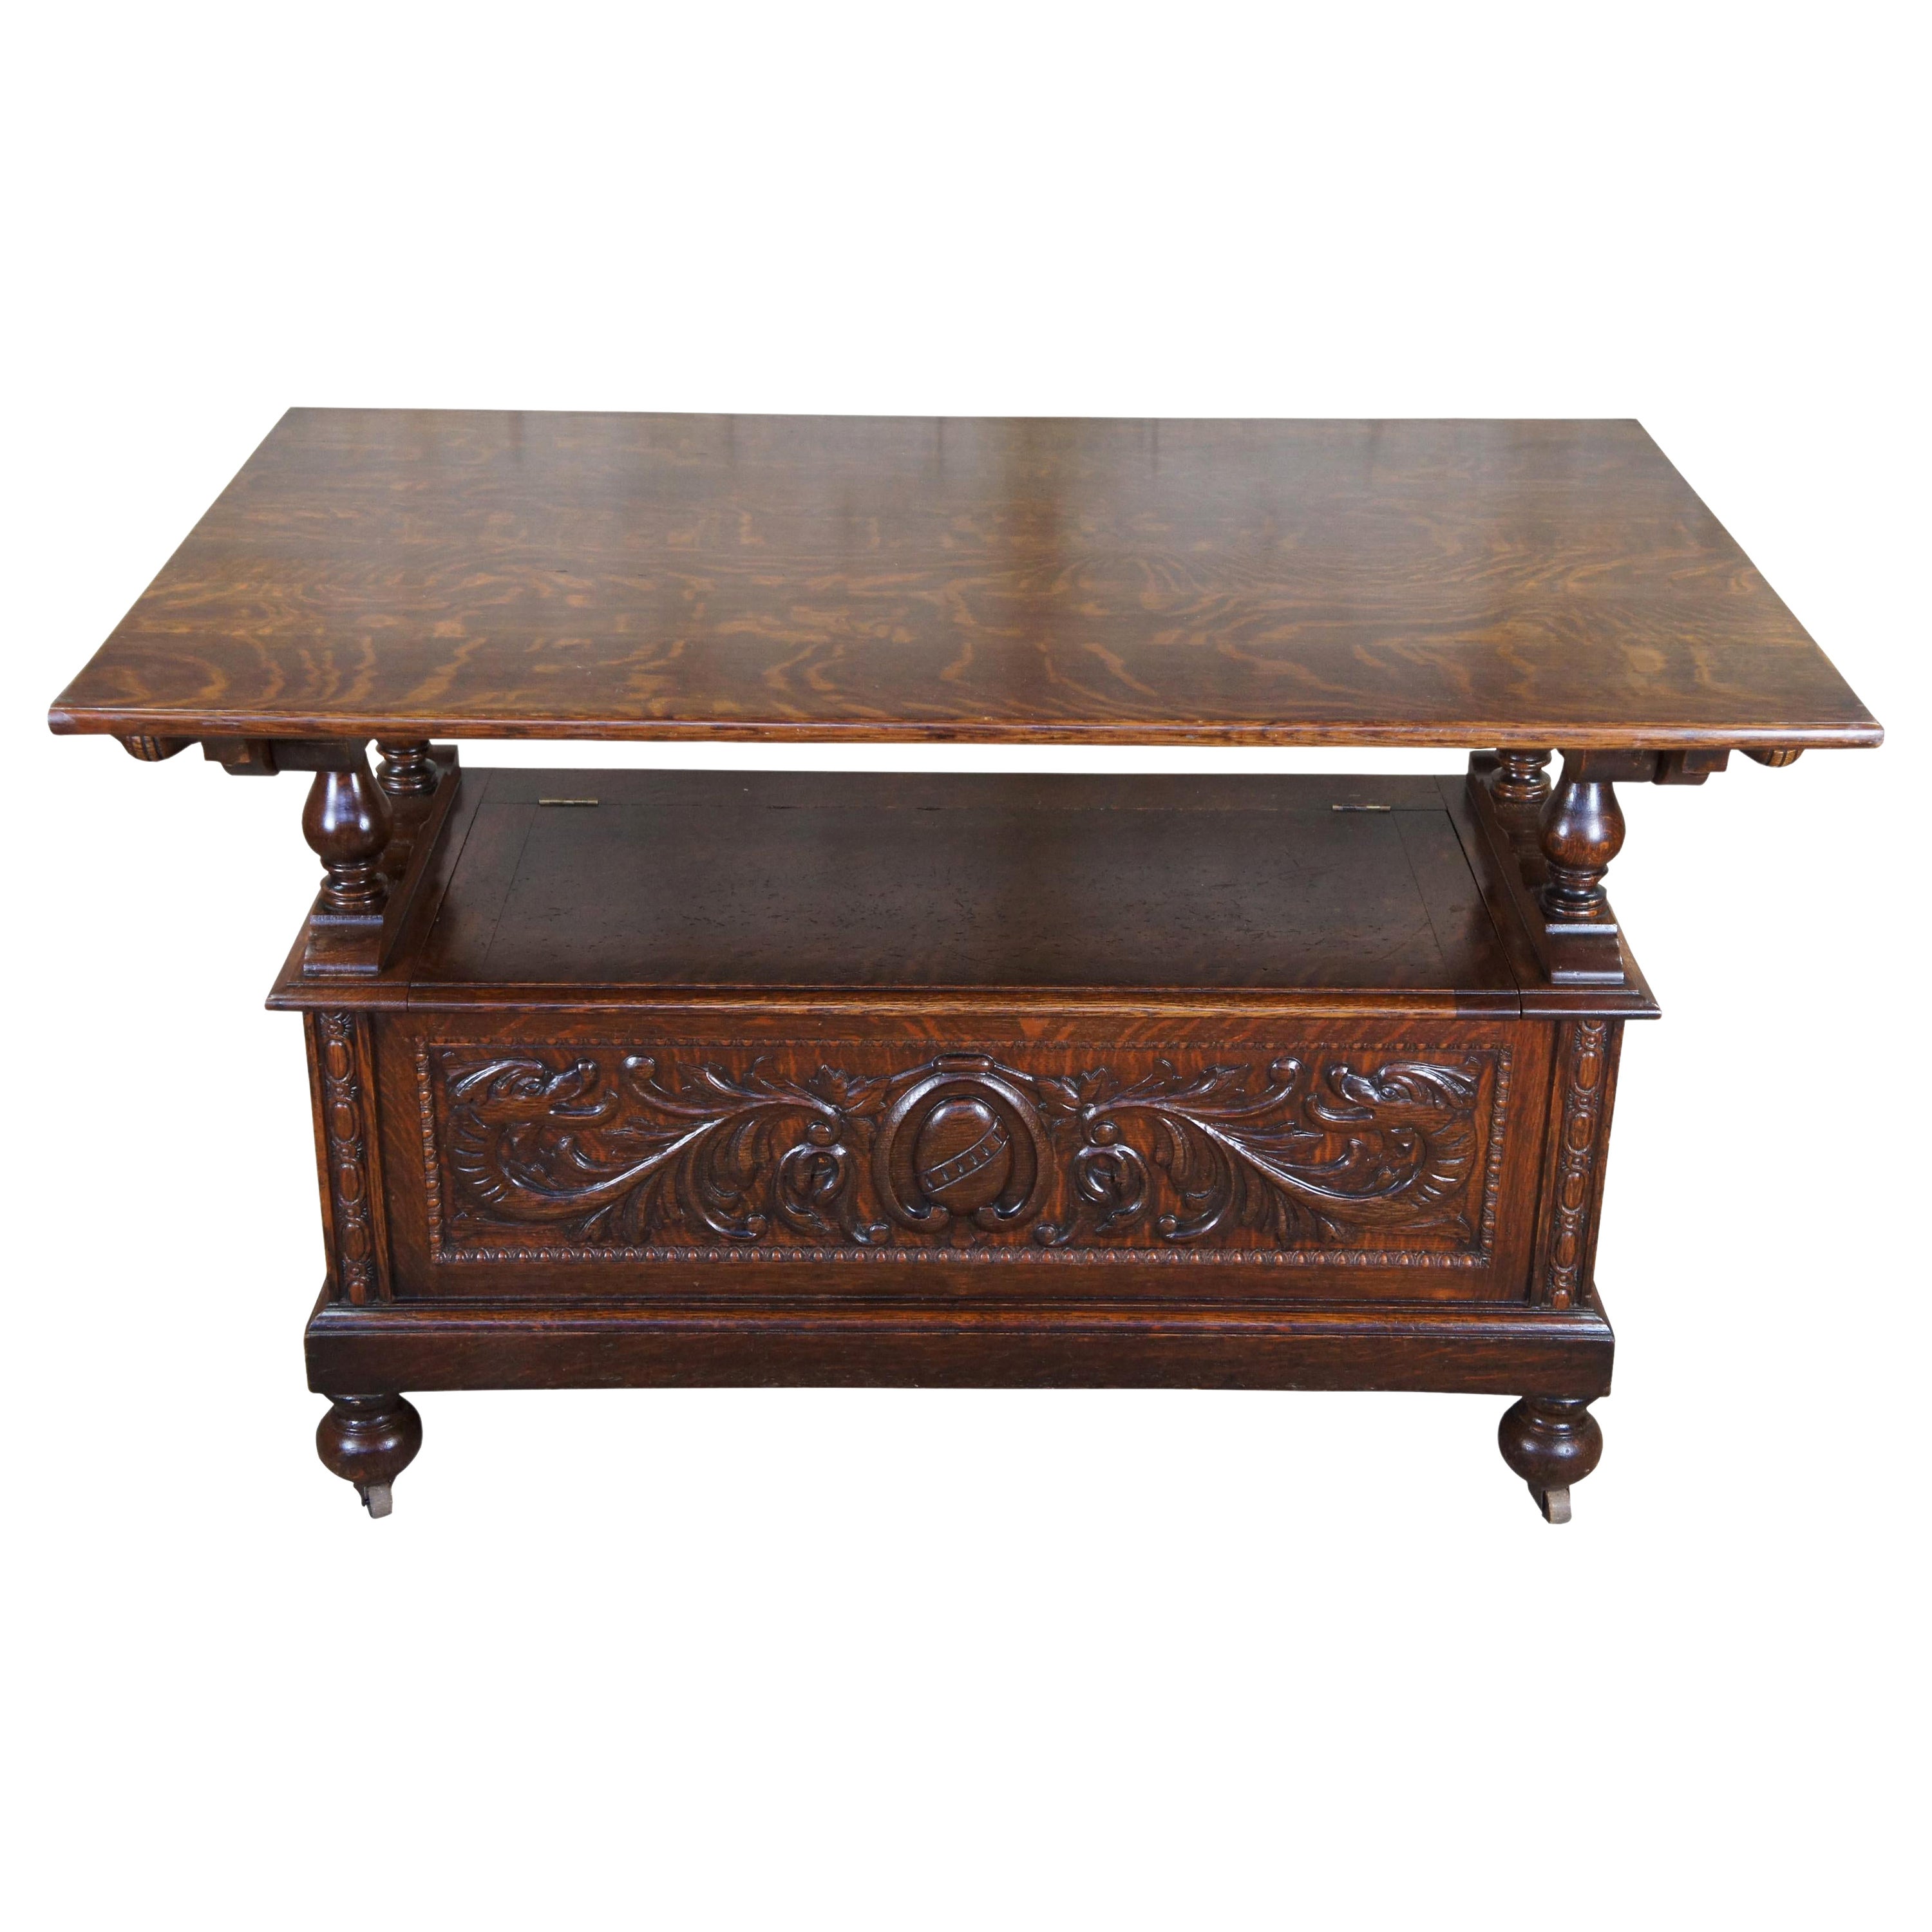 Antique Monks Bench / Hutch Table

The term hutch table took form in the early 18th century when it was important to maximize storage and space.  The combination of a table and a chest that could quickly be converted into a chair or settee.   This